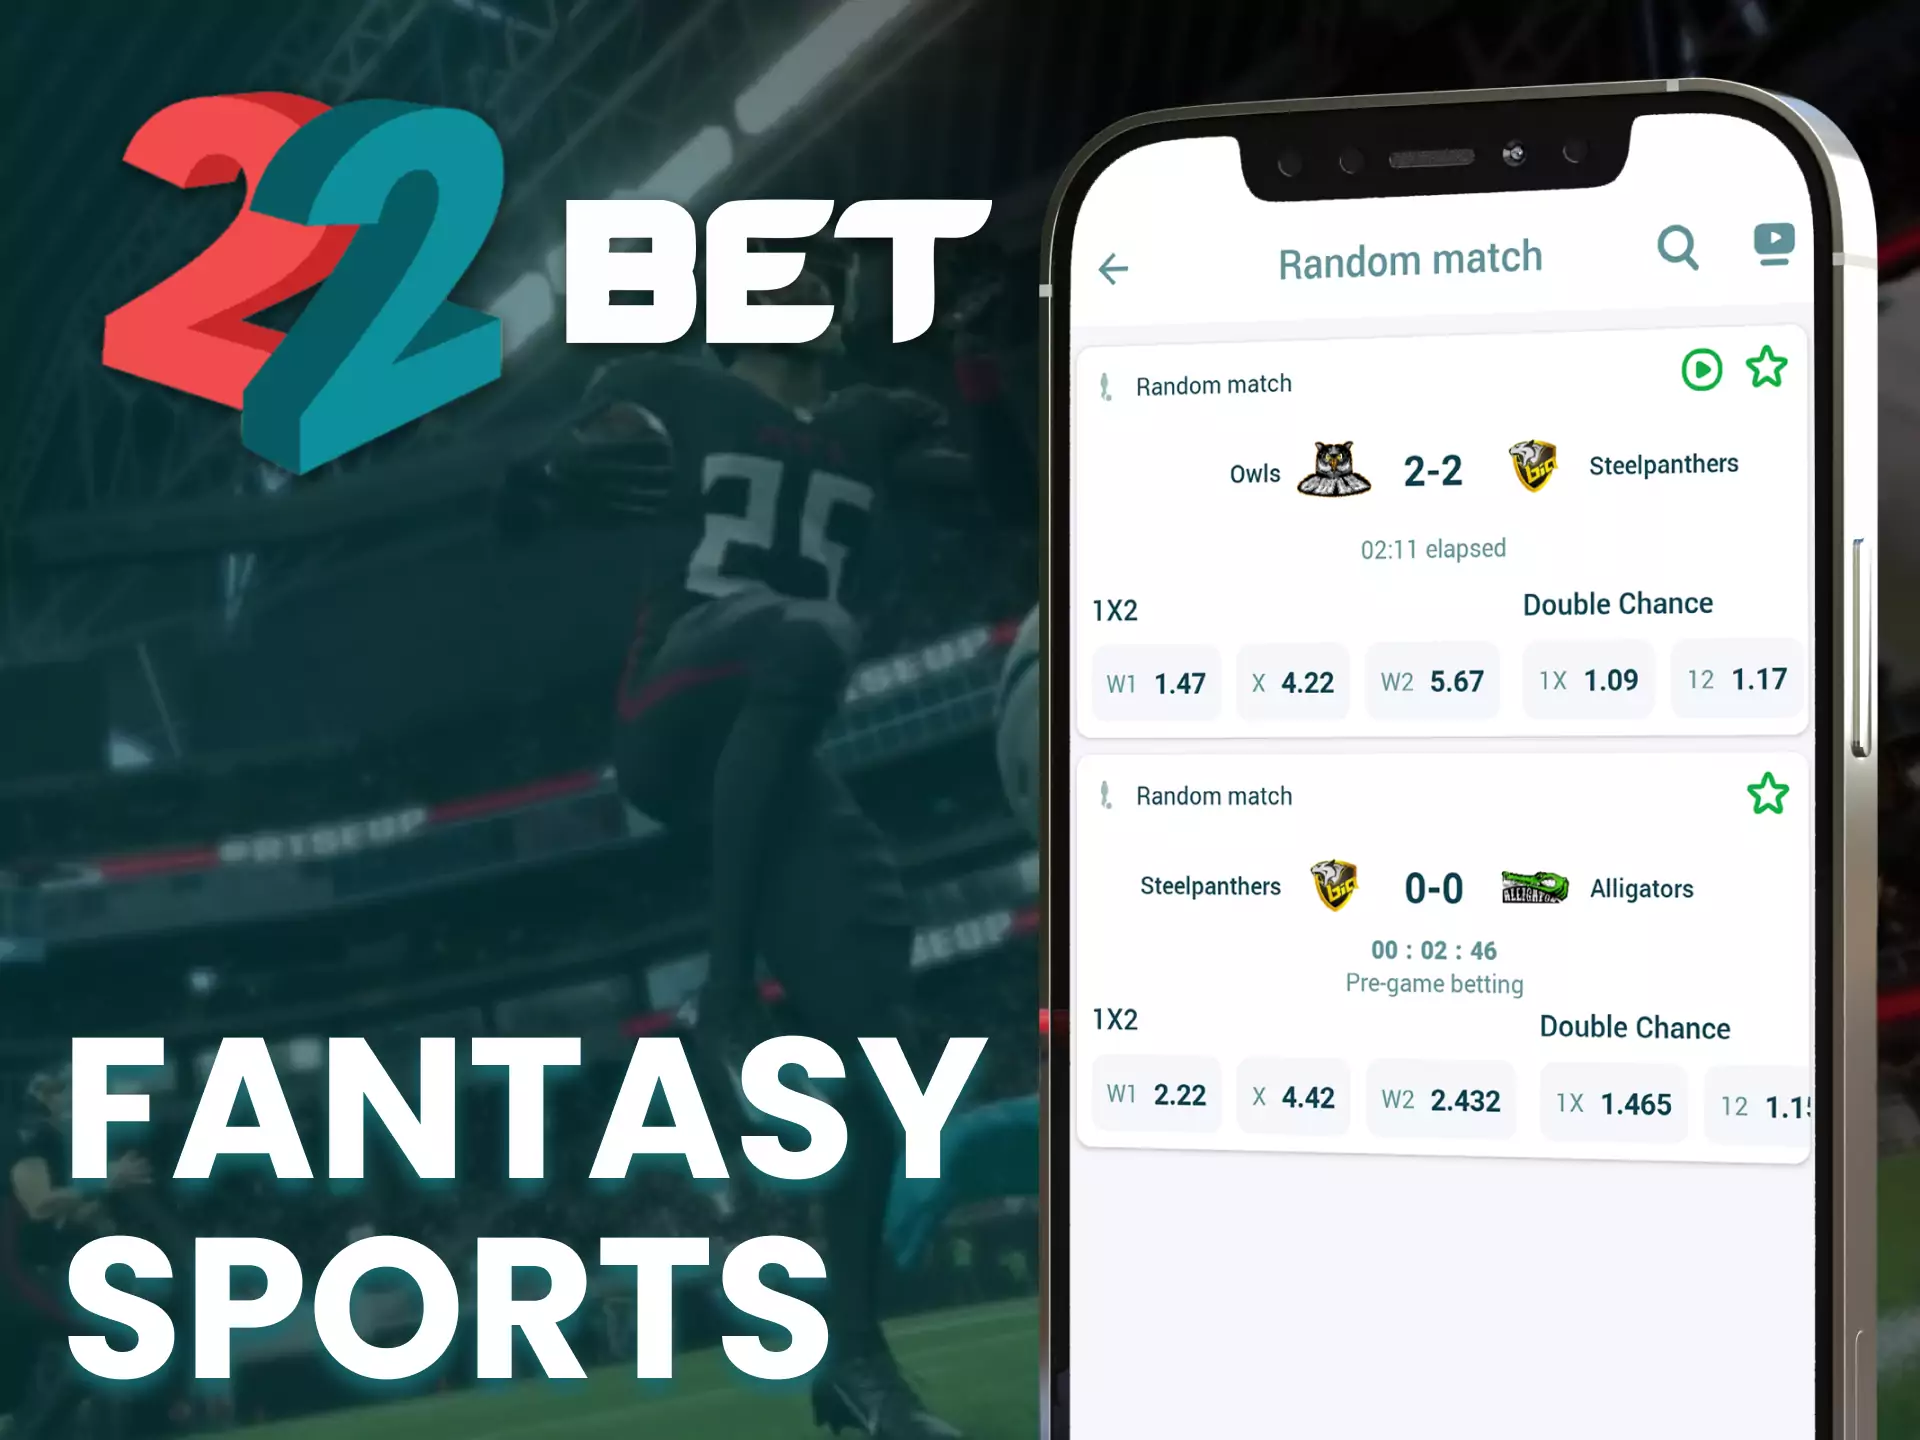 With the 22bet app, bet on fantasy sports.